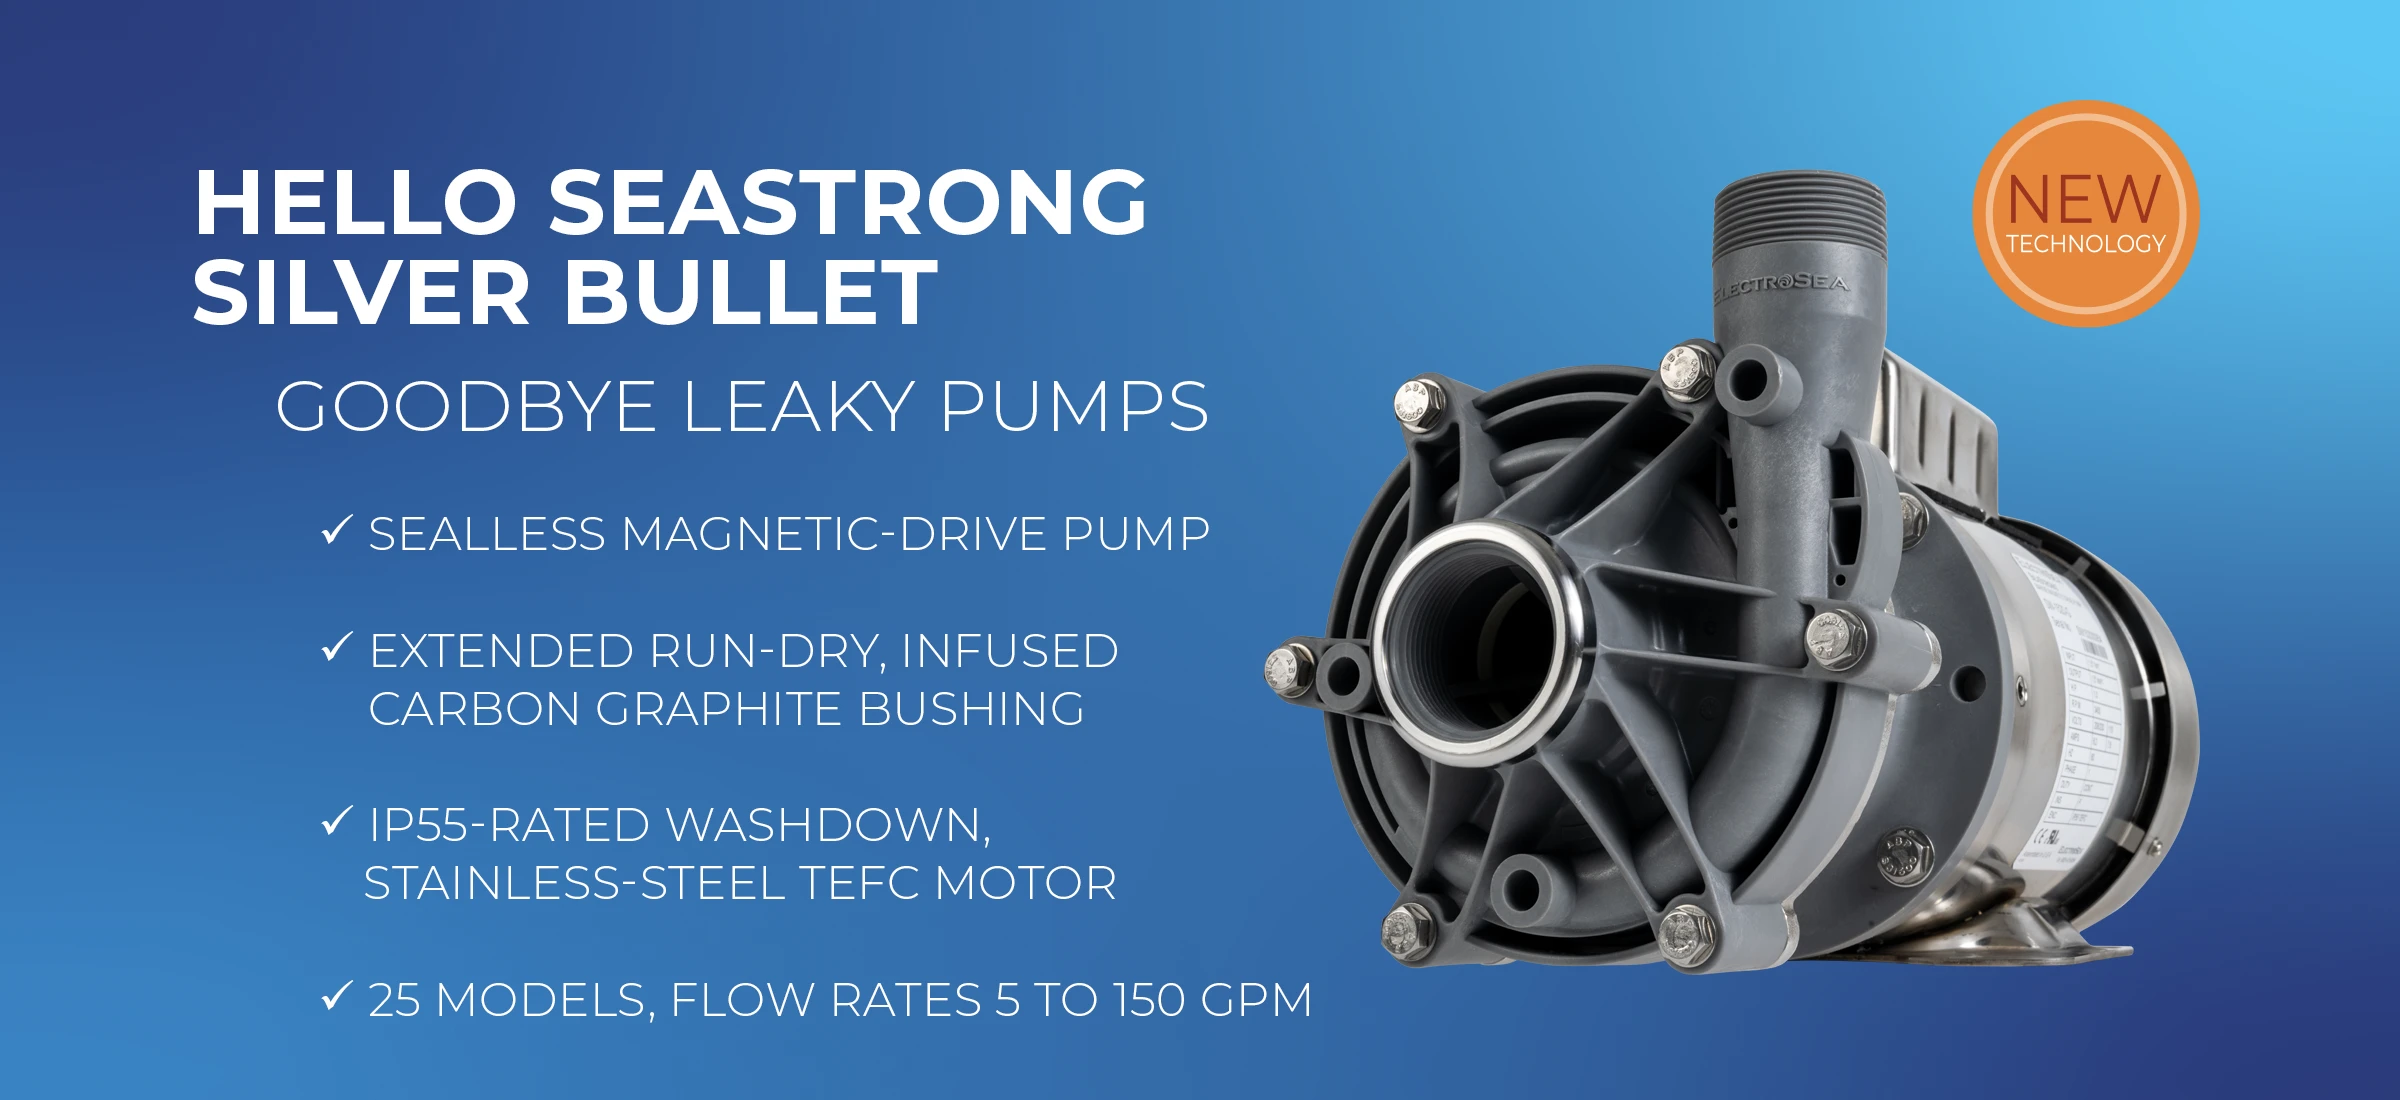 Hello SeaStrong Silver Bullet - Goodbye Leaky Pumps